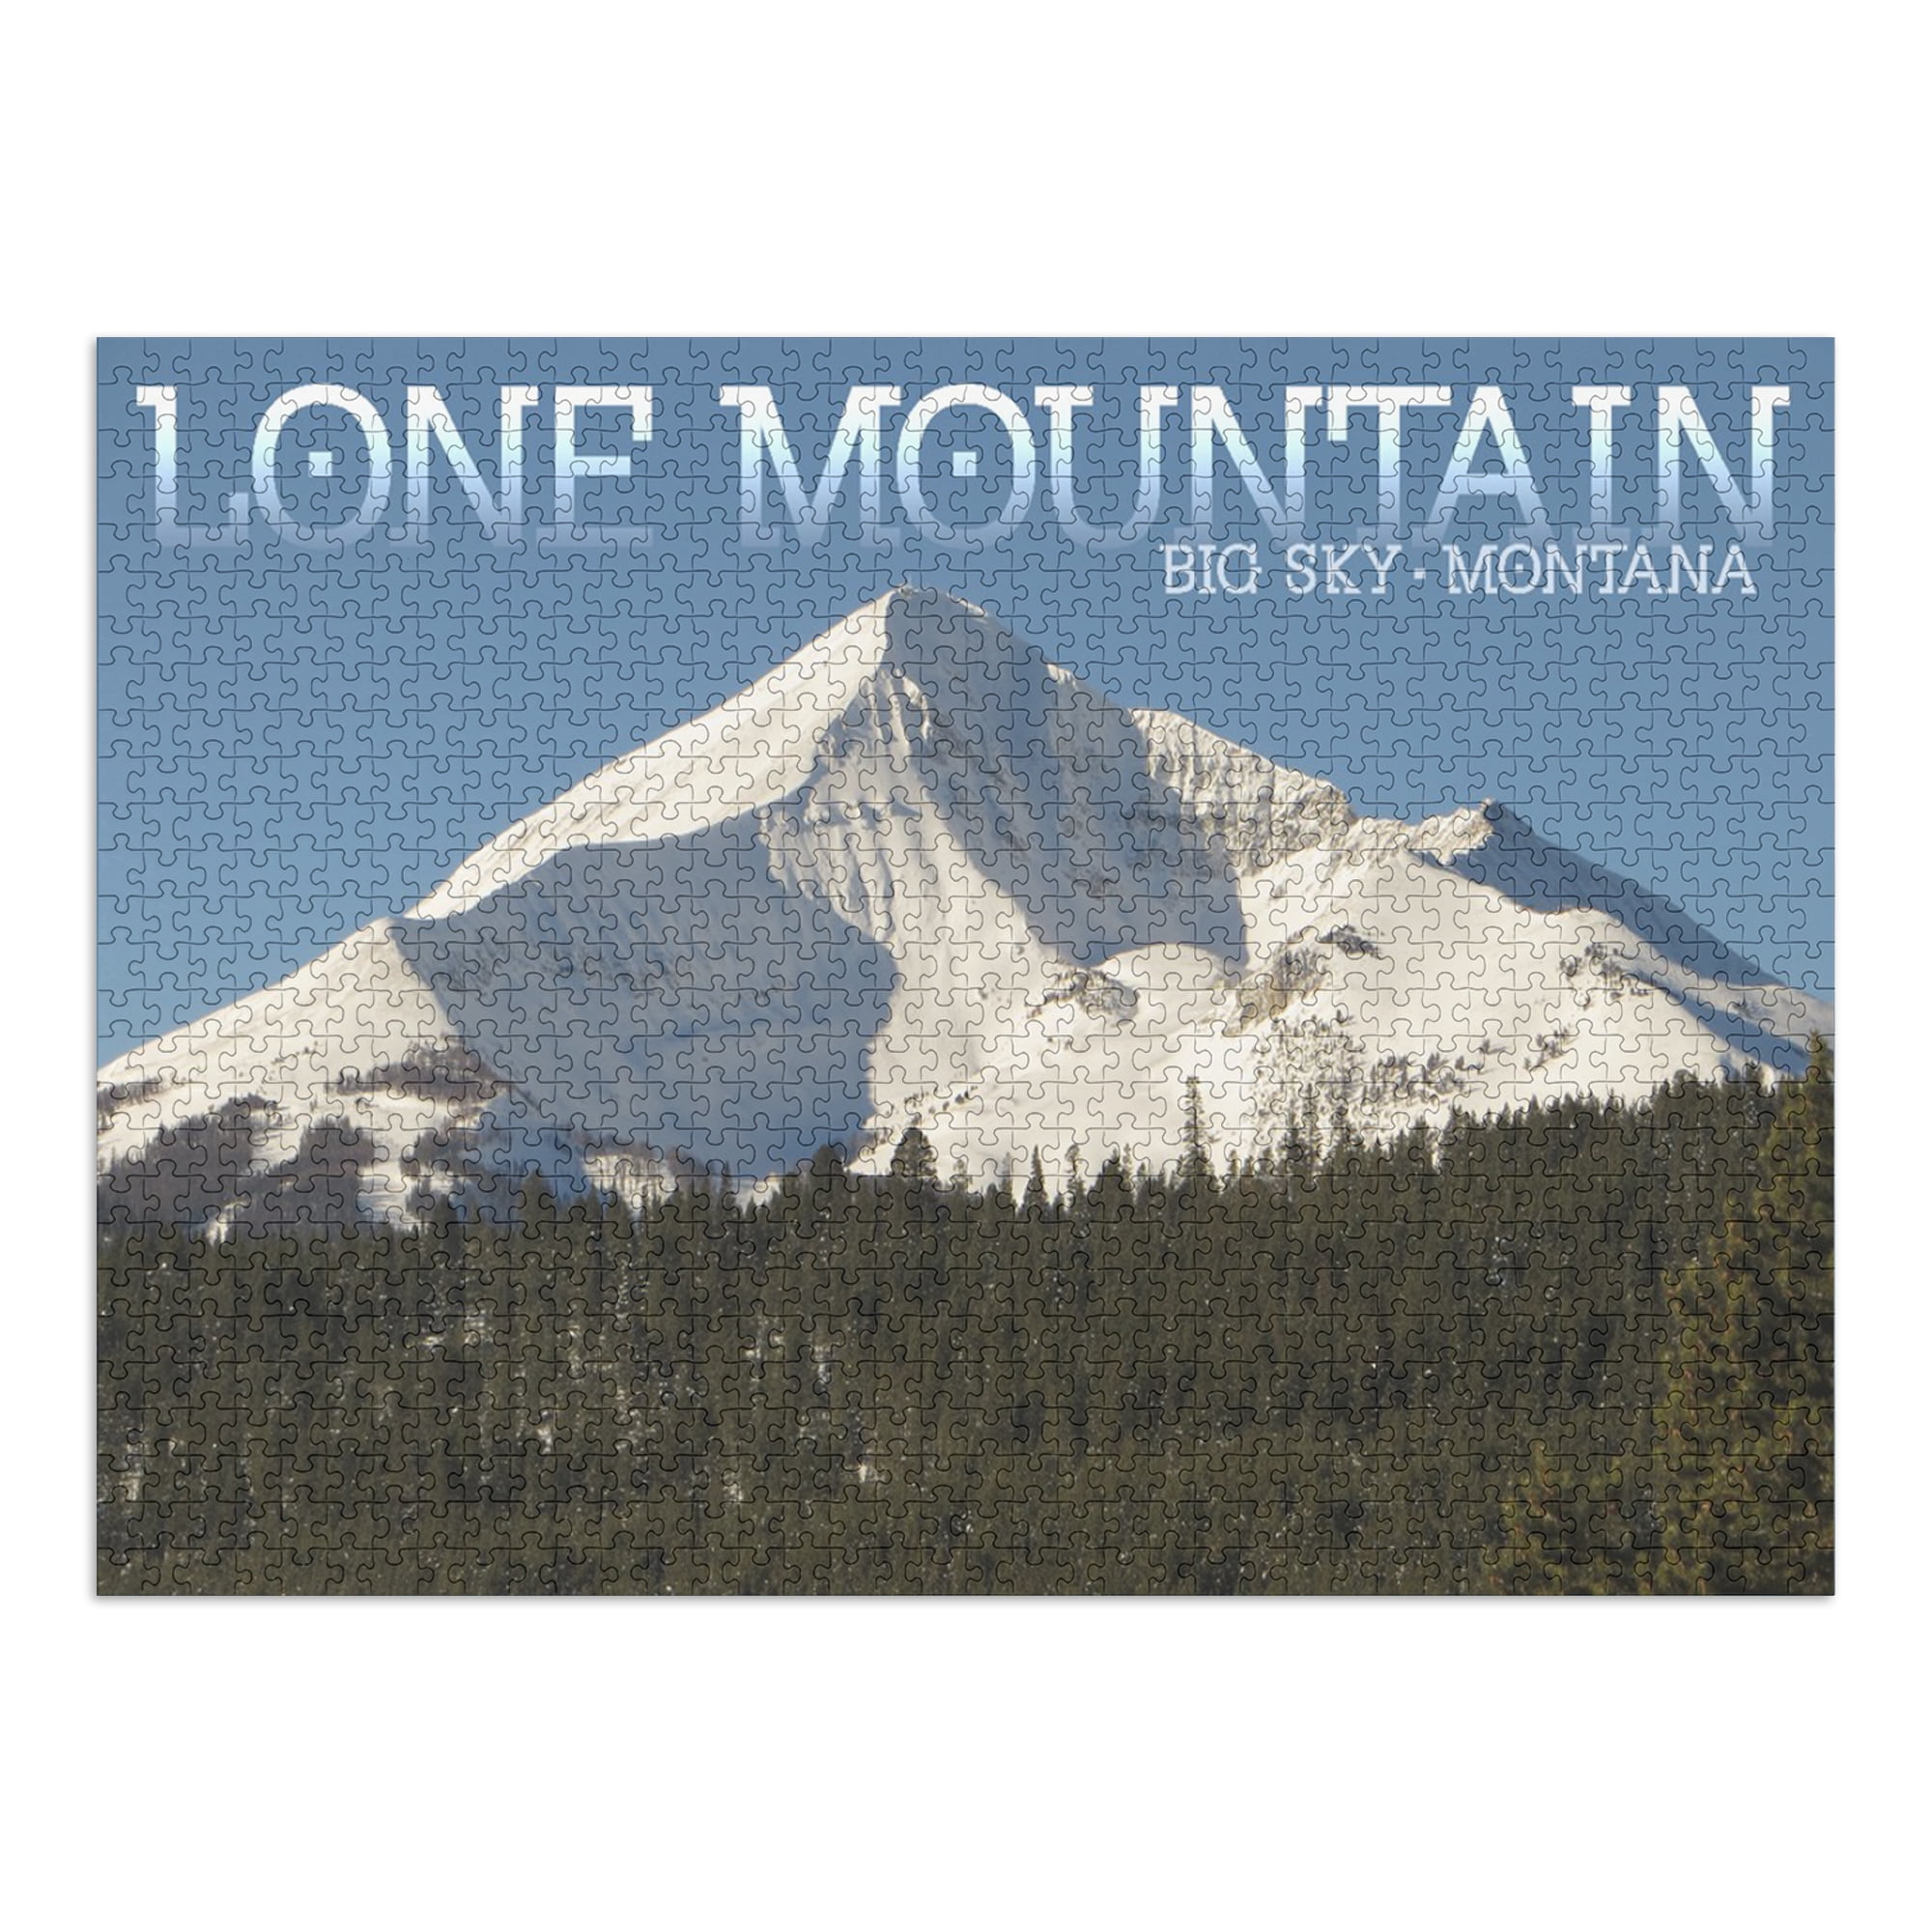 Snowy Range Mountains, Wyoming, Distress Vector Shapes (1000 Piece Puzzle,  Size 19x27, Challenging Jigsaw Puzzle for Adults and Family, Made in USA)